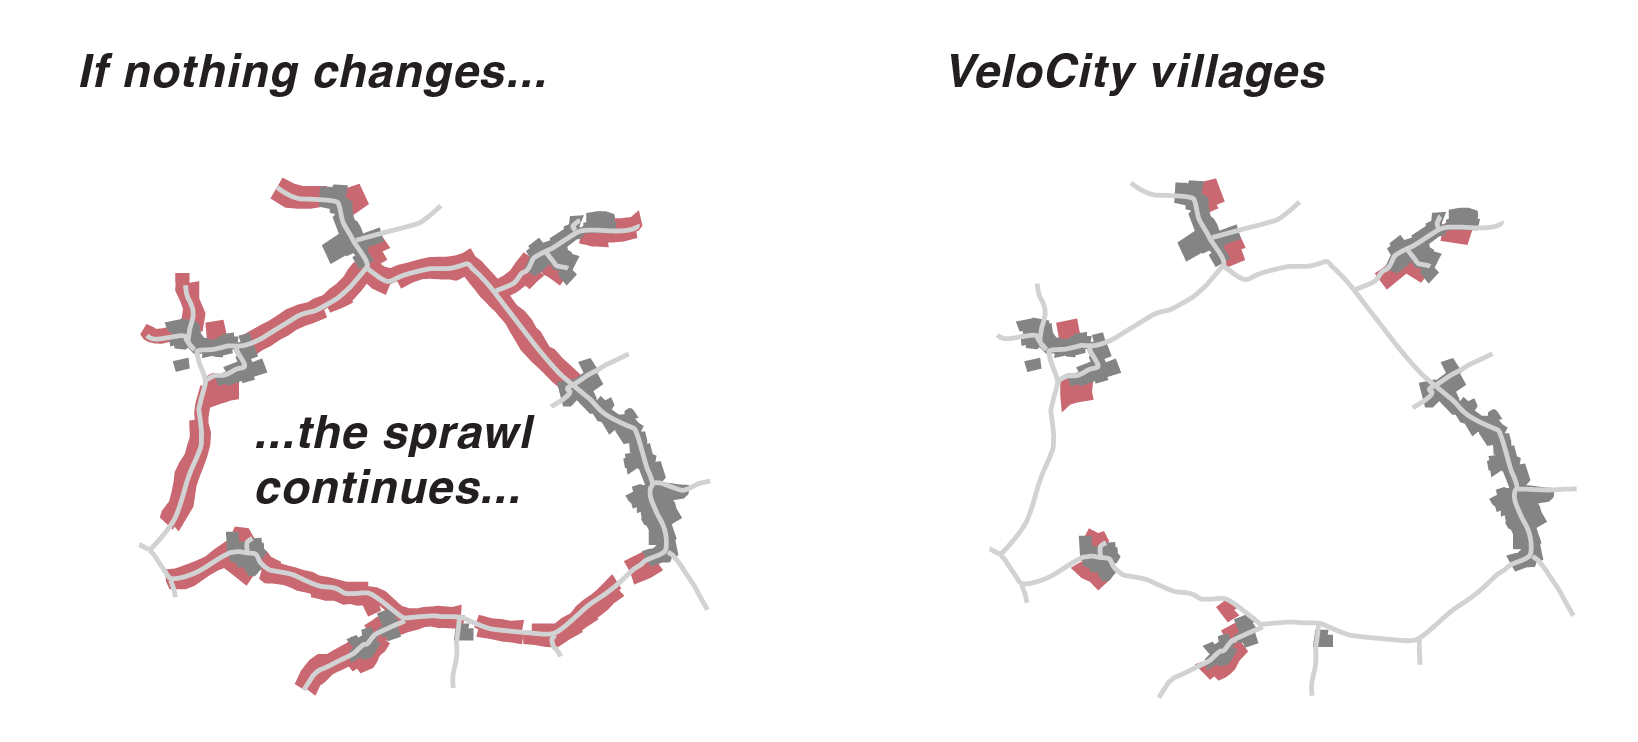 Image 4. Current development in rural areas leads to sprawl. VeloCity proposes to keep villages compact and walkable through focusing new development in and around the village core. Source: Author.